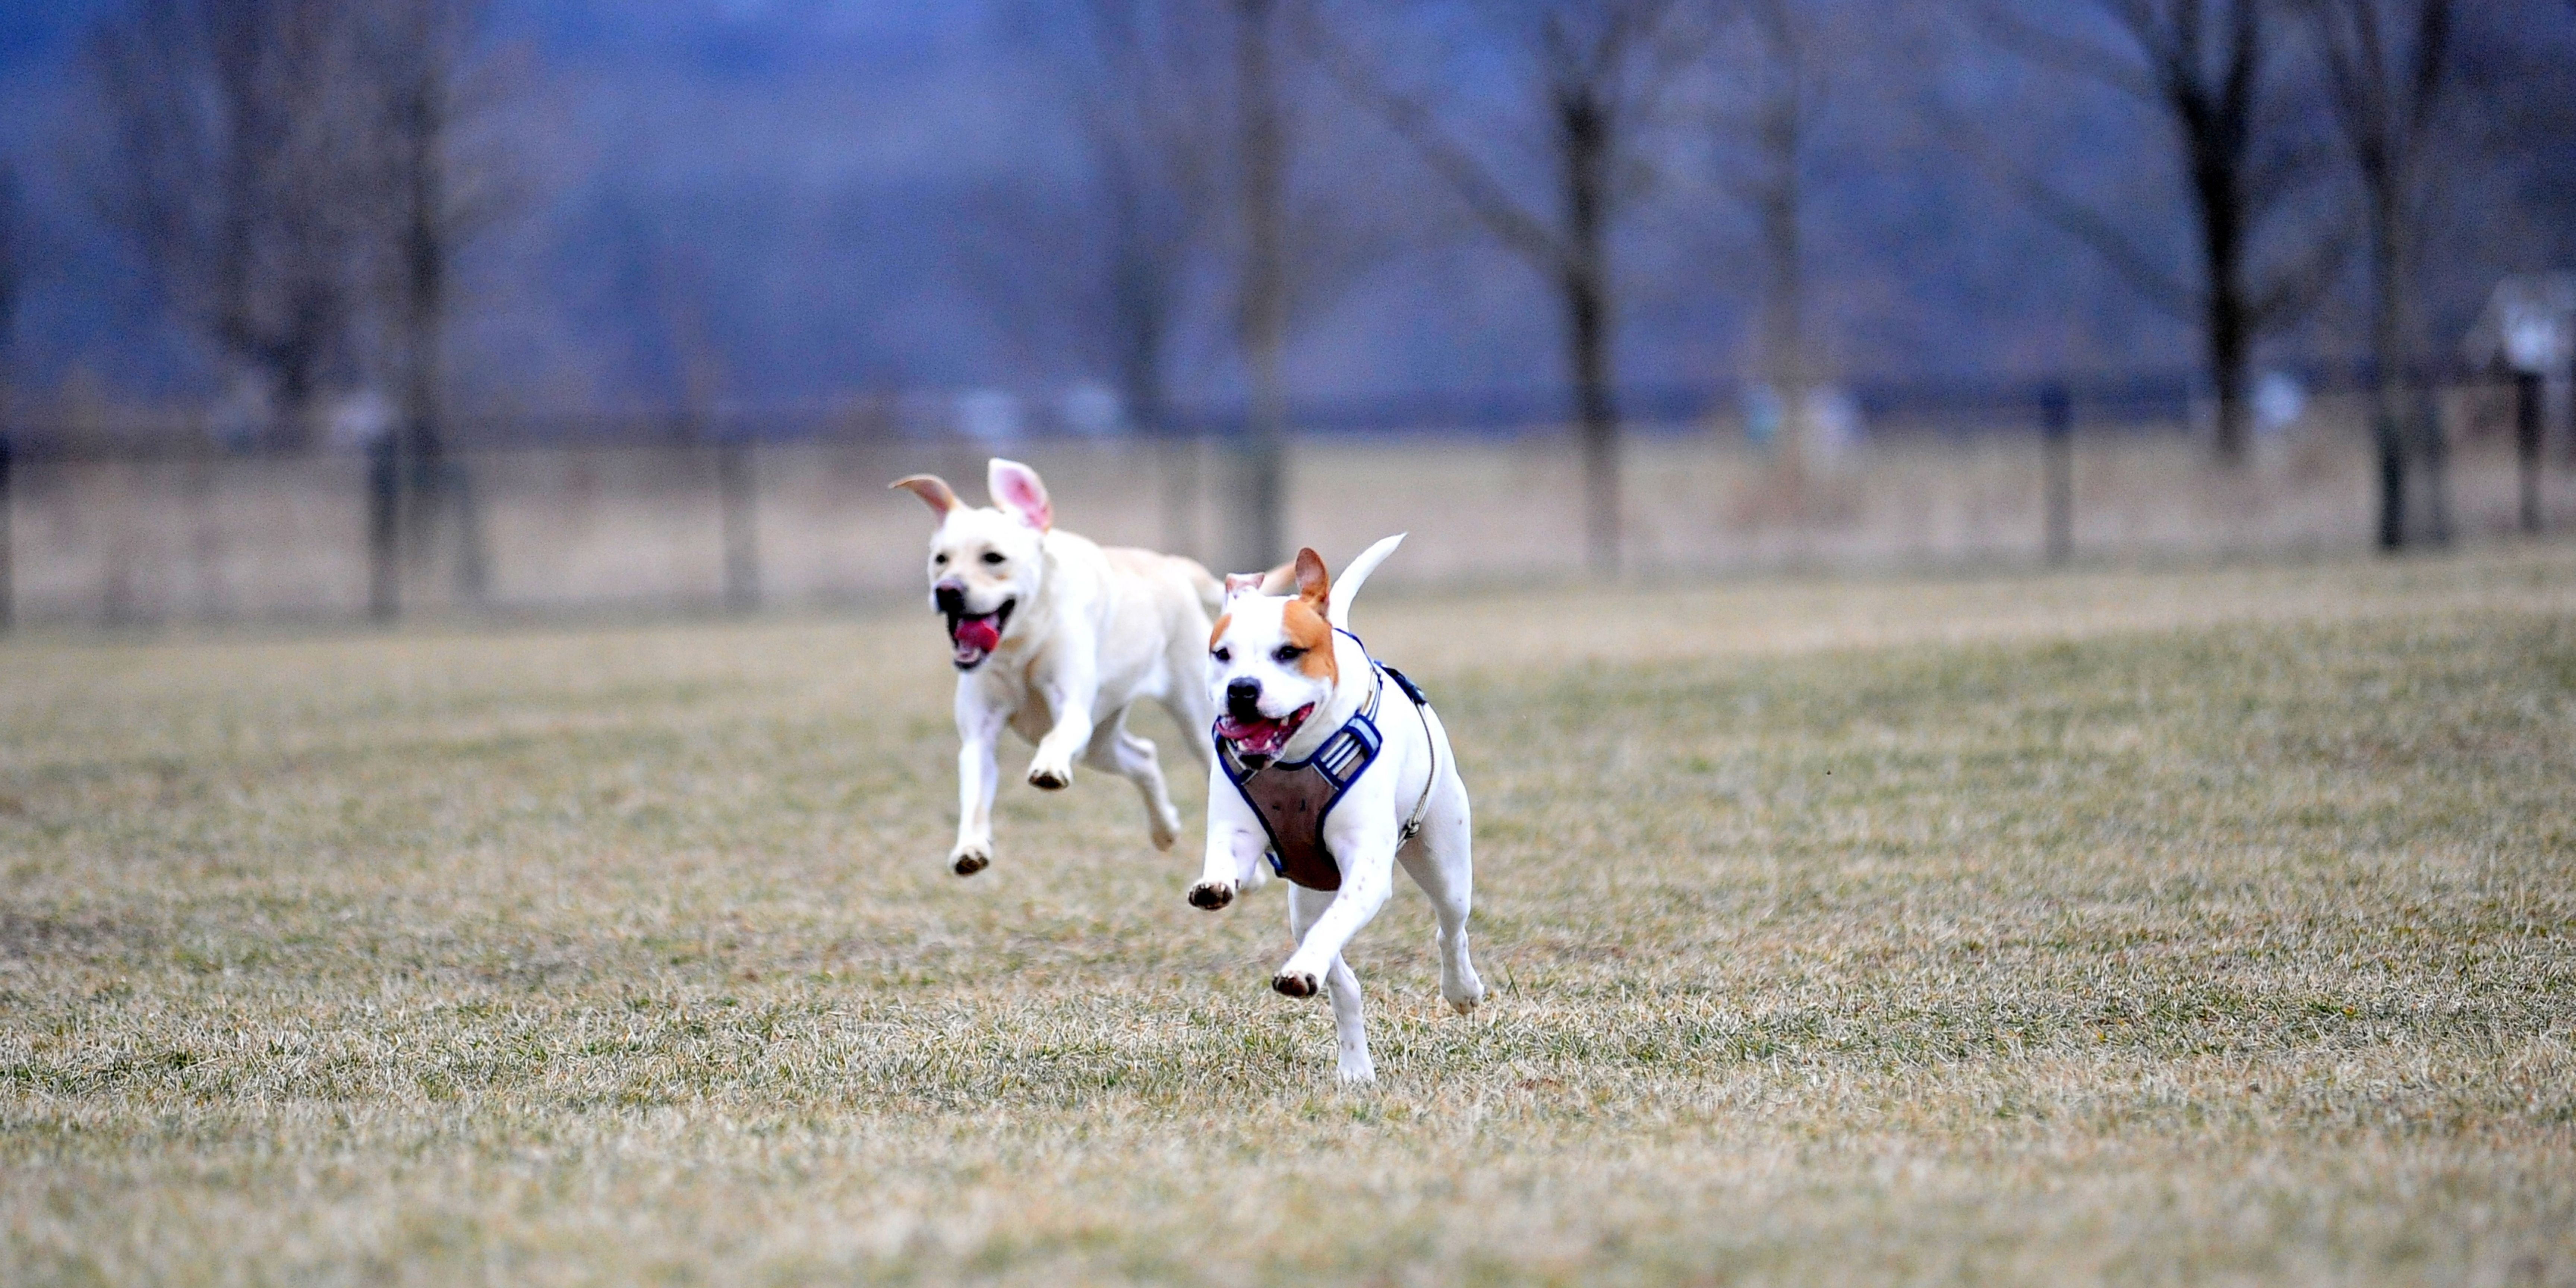 Two white dogs running on grass